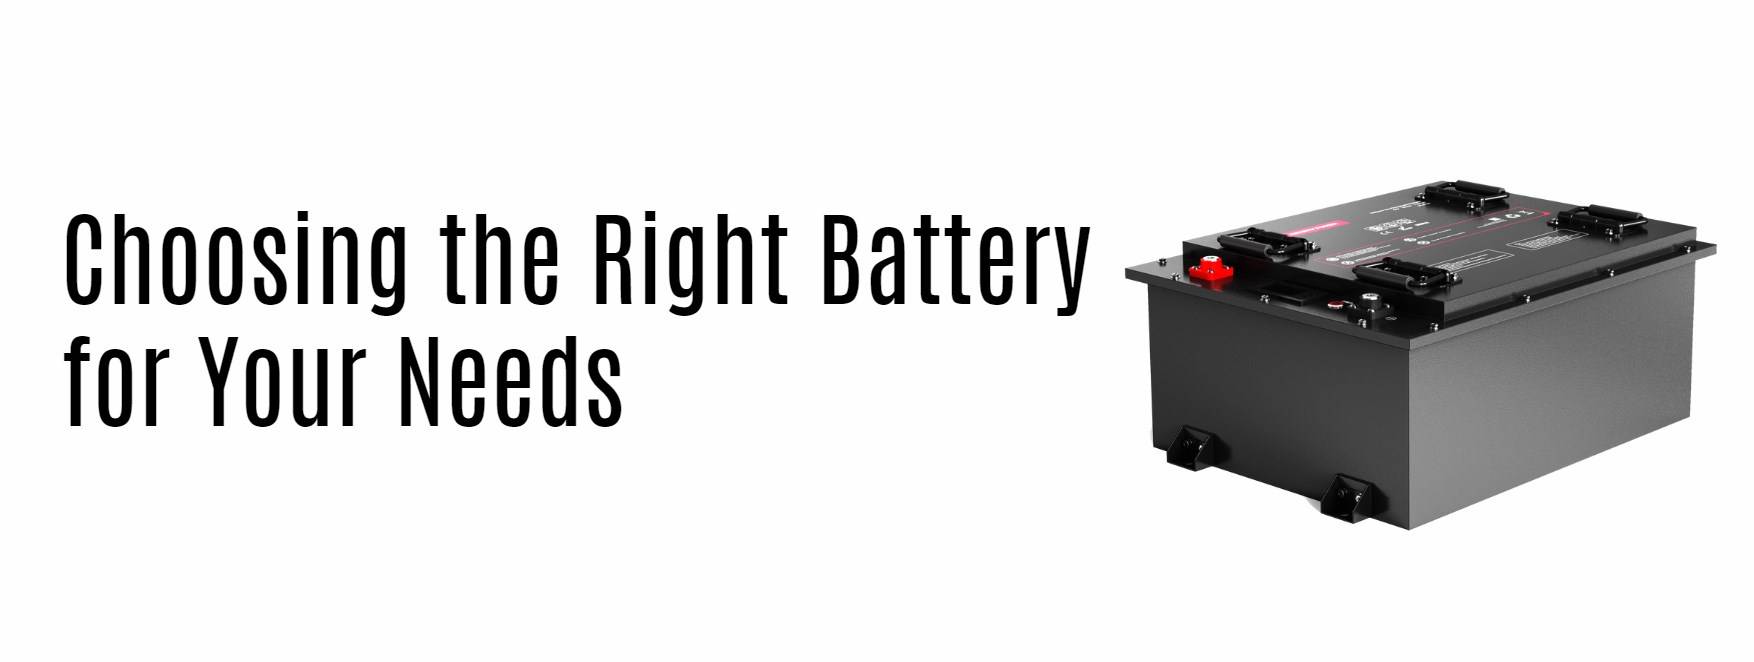 Choosing the Right Battery for Your Needs. 48v 150ah golf cart lithium battery factory